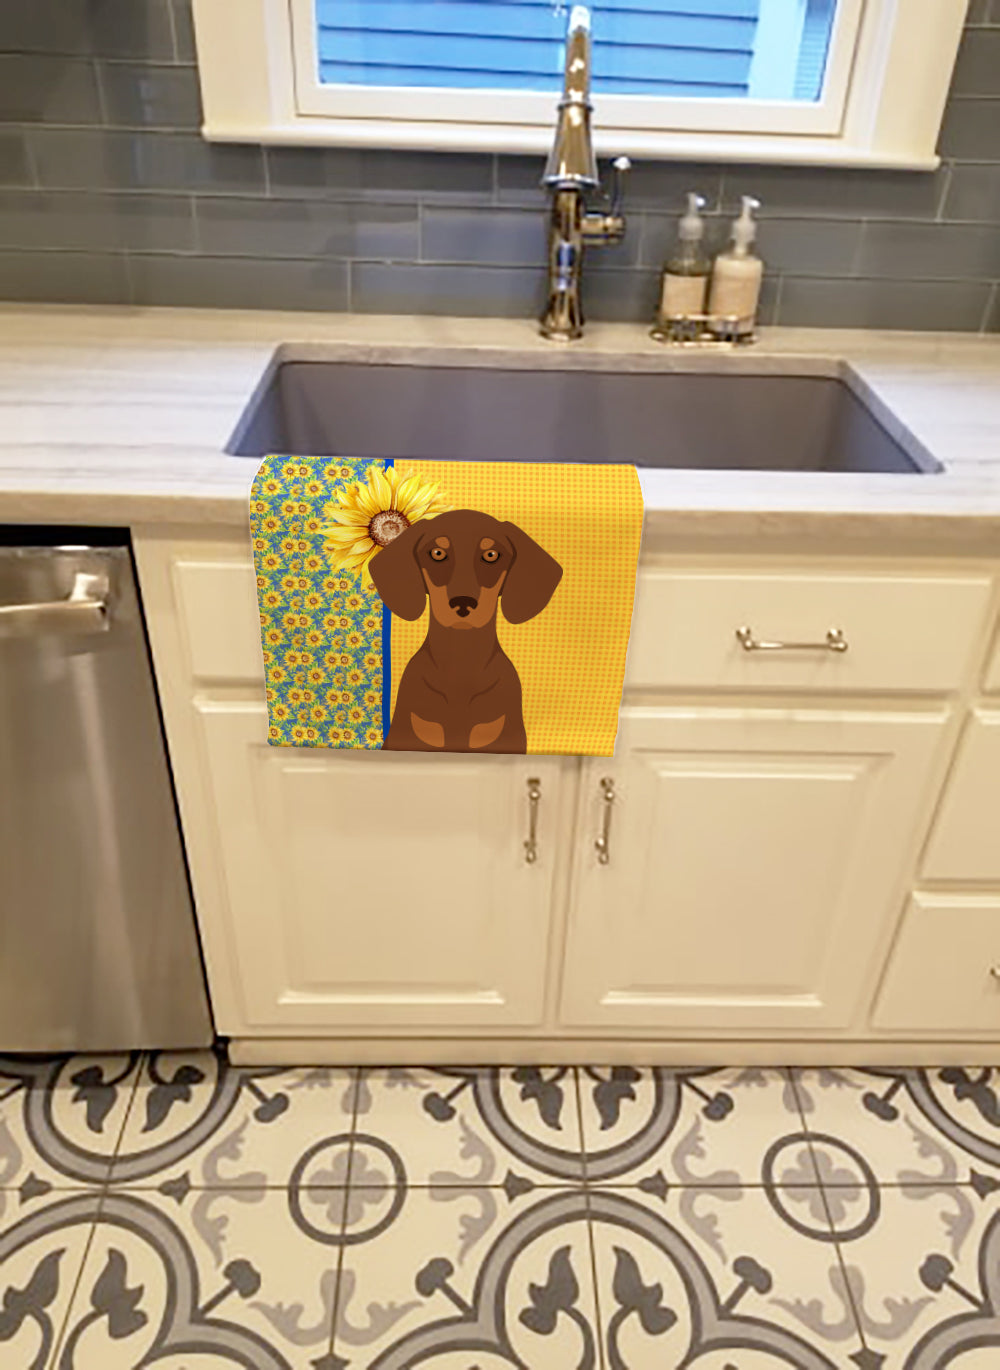 Buy this Summer Sunflowers Chocolate and Tan Dachshund Kitchen Towel